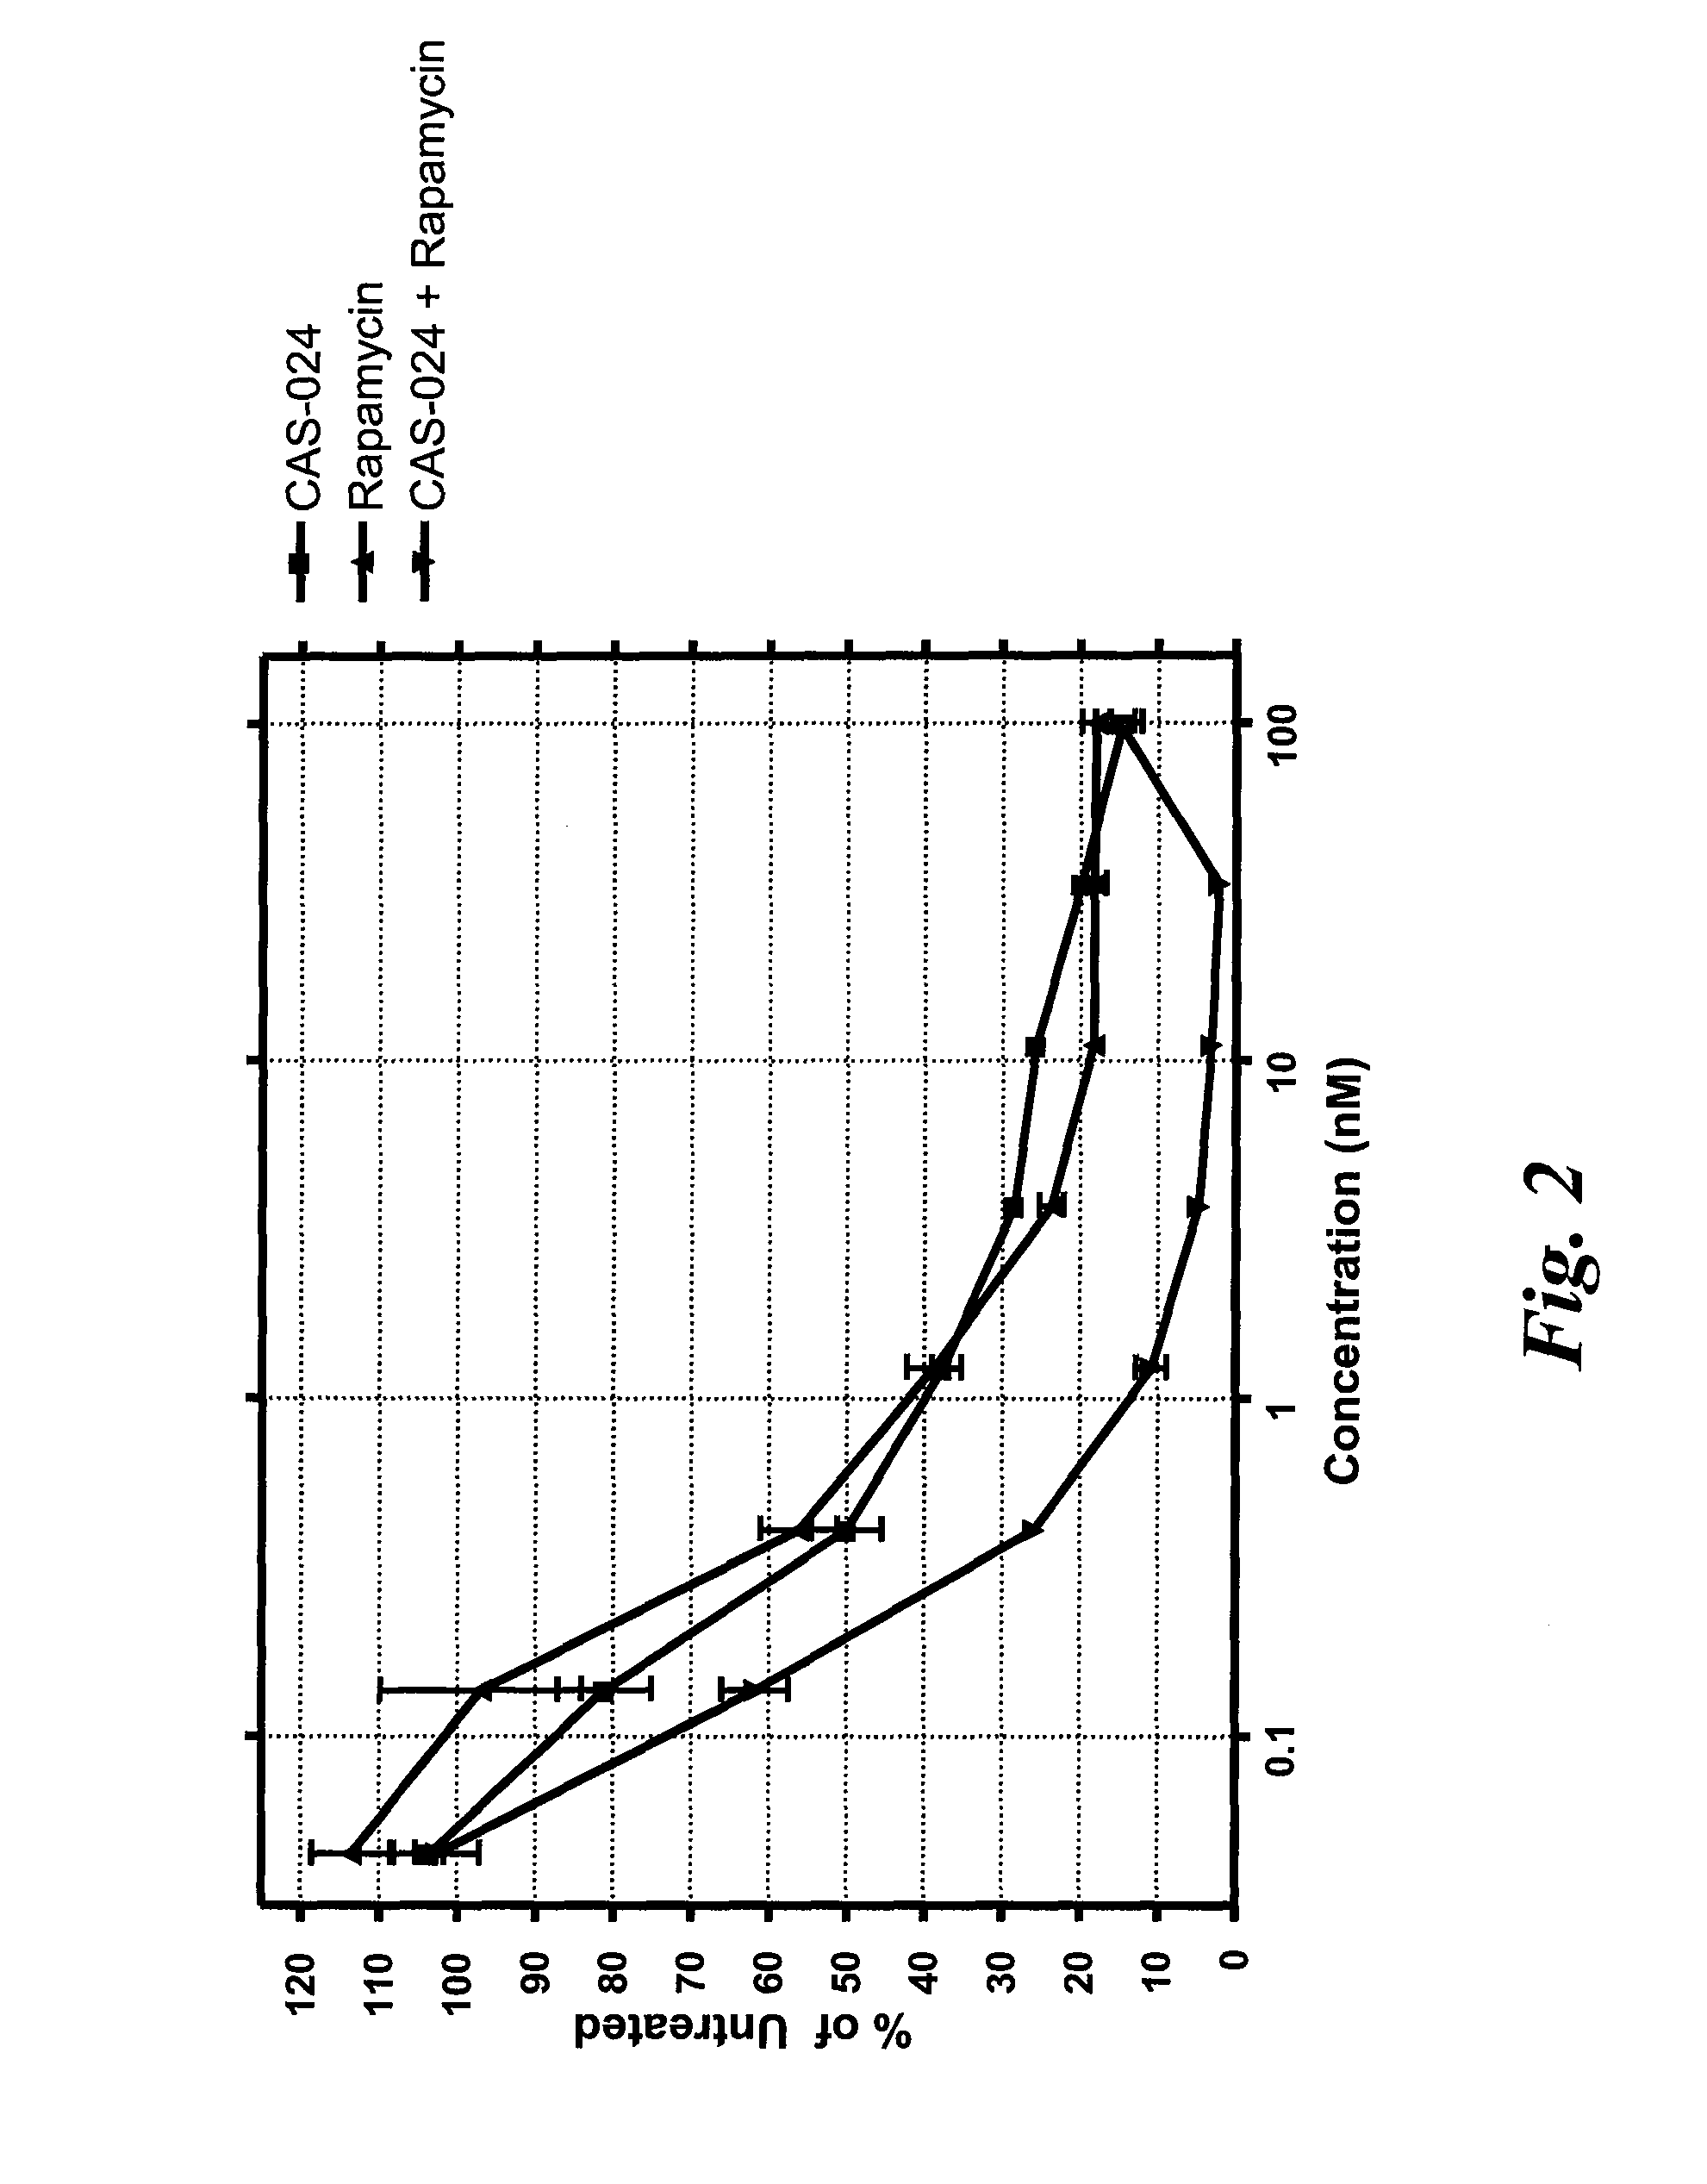 Cd37 immunotherapeutic combination therapies and uses thereof